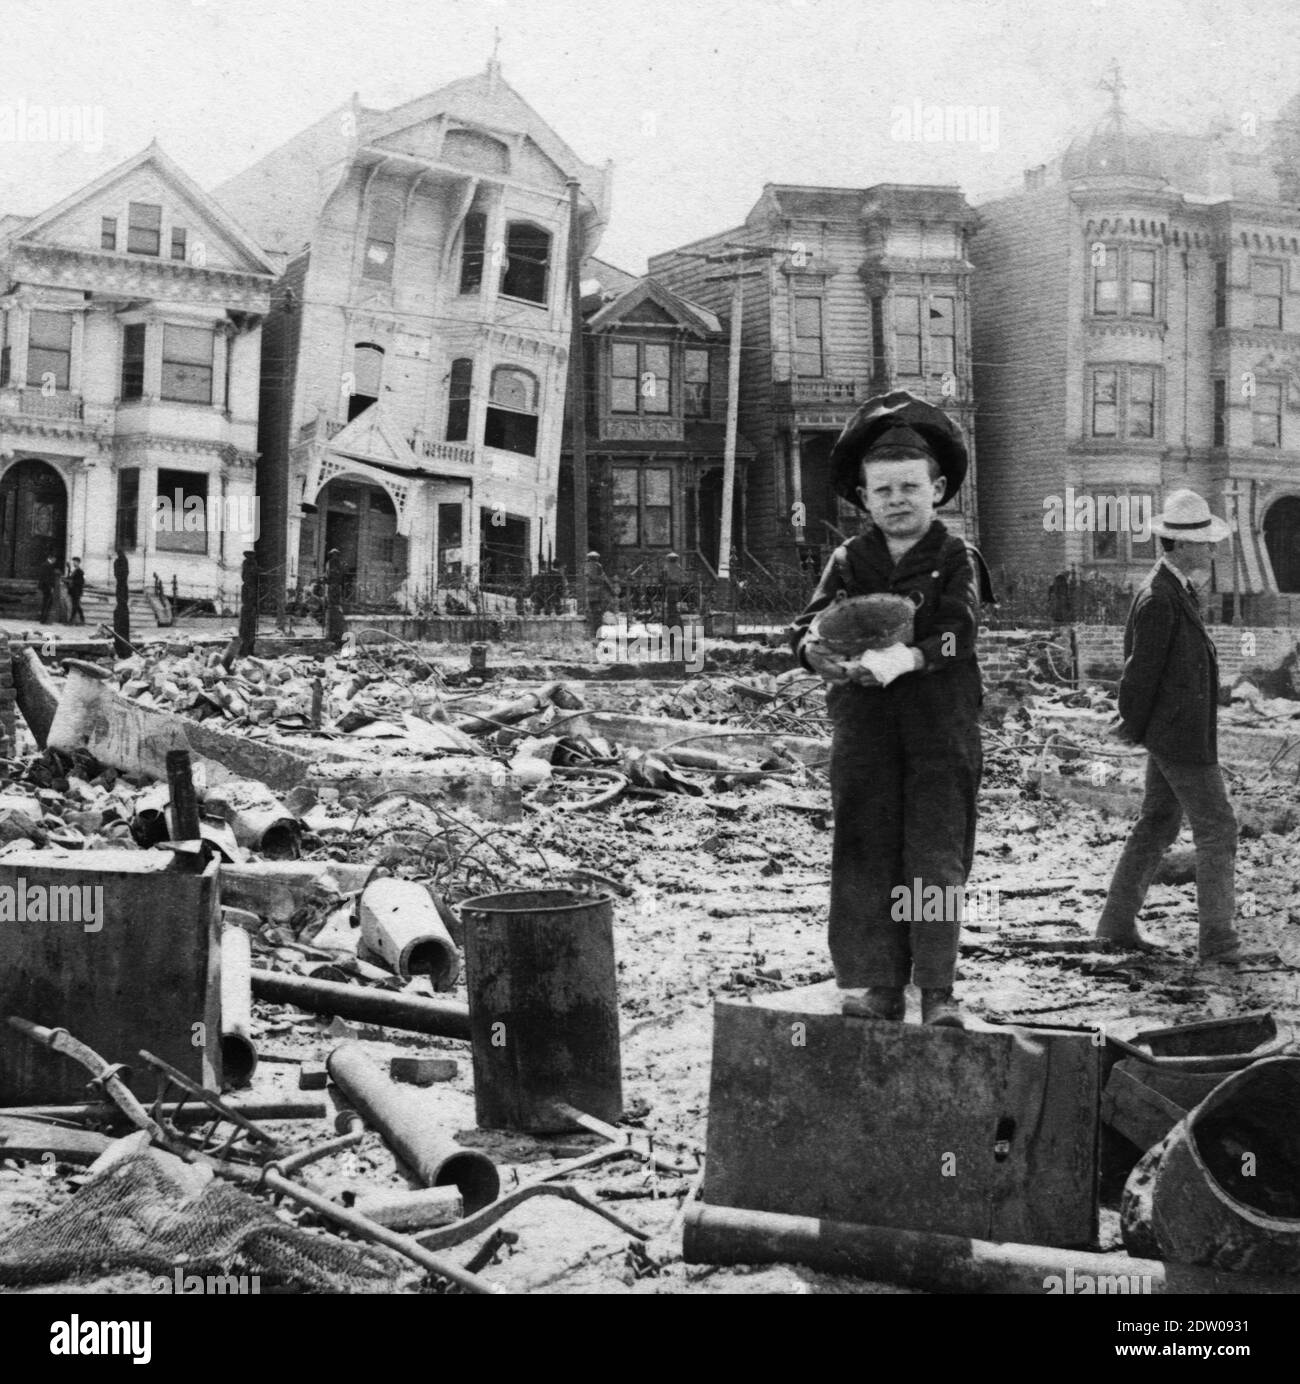 The Great 1906 San Francisco [California] earthquake happened on April 18, 1906.  It hit with an estimated magnitude of 7.9.   The little boy holds a small pail. These two people are unidentified.   The earthquake was felt from southern Oregon to south of Los Angeles and inland as far as central Nevada.   To see other images of noteworthy places, search:  prestor   vintage   places Stock Photo